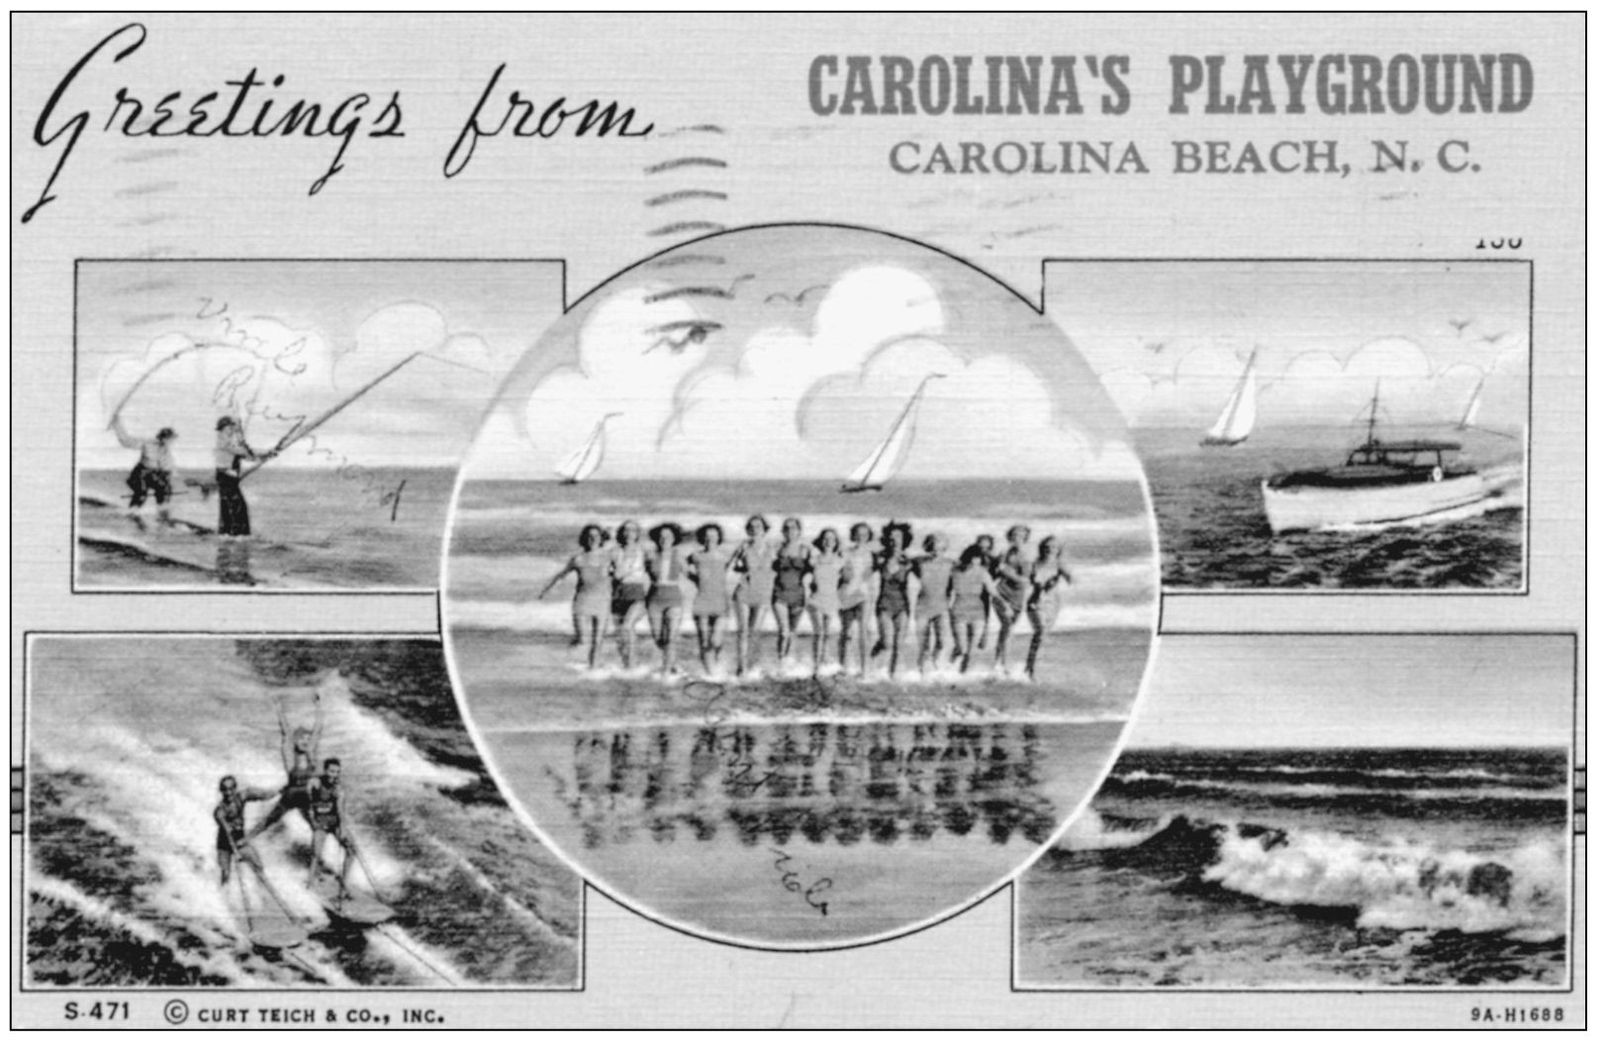 CAROLINAS PLAYGROUND An aunt and uncle sent this card to their young nephew in - photo 5